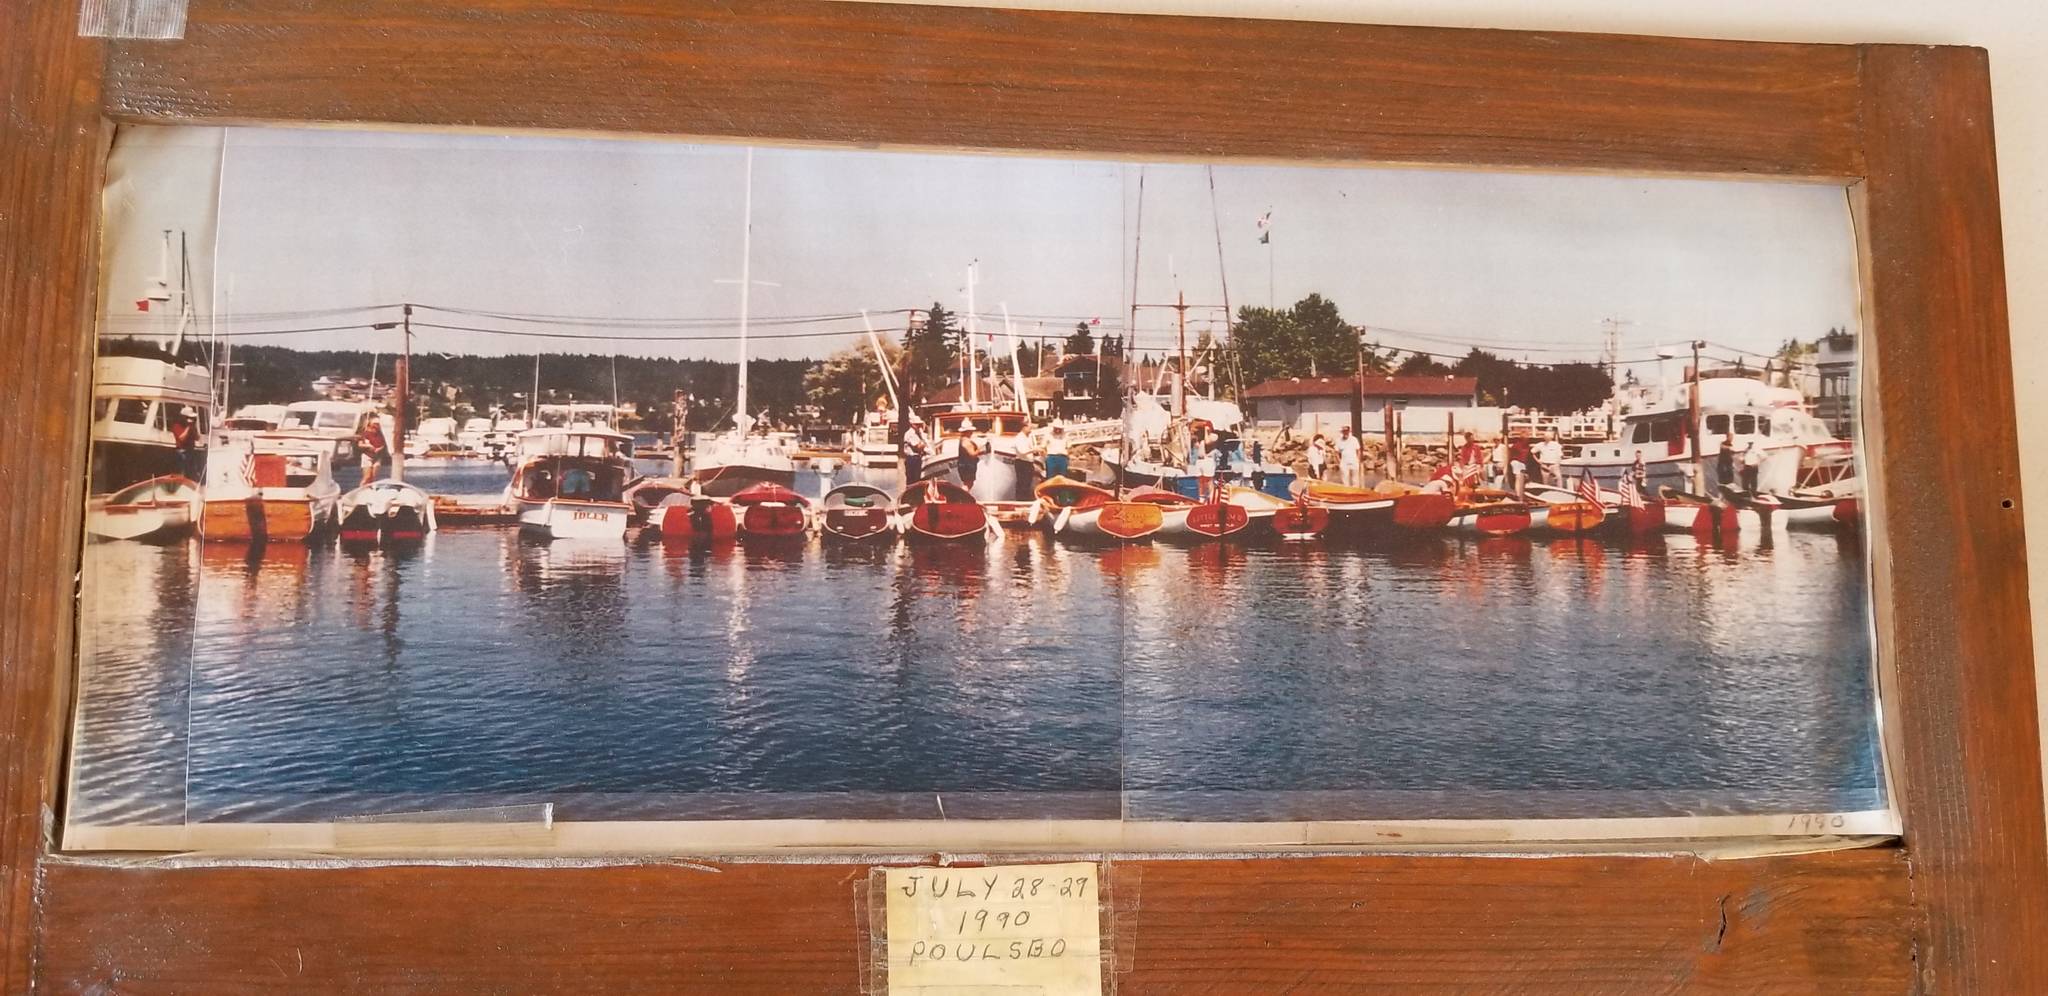 A photo from the 1990 of the Poulsbo Boat Rendezvous sees a number of Young’s characteristic boat moored at the Port of Poulsbo.